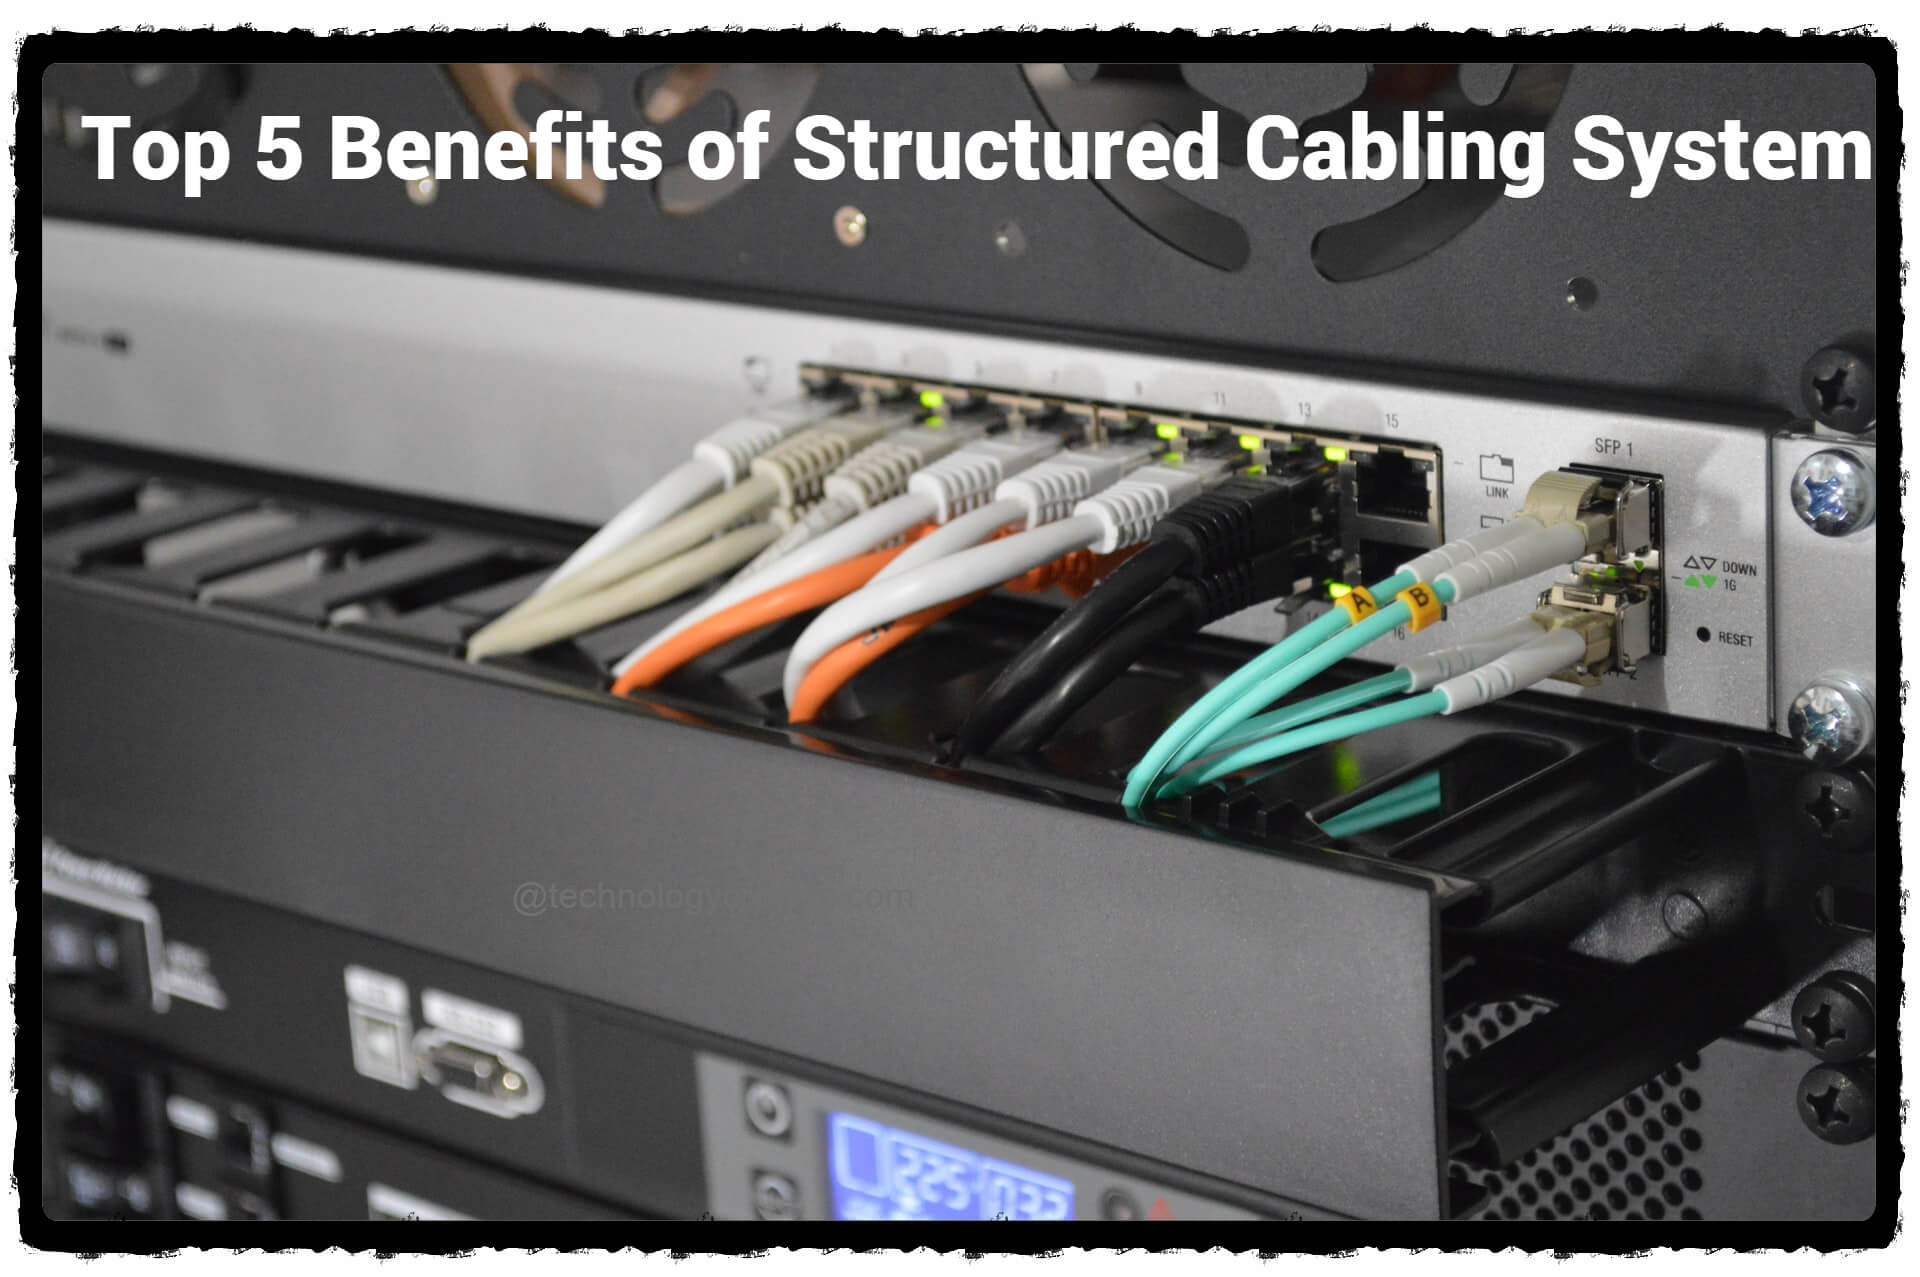 Top 5 Benefits of Structured Cabling System